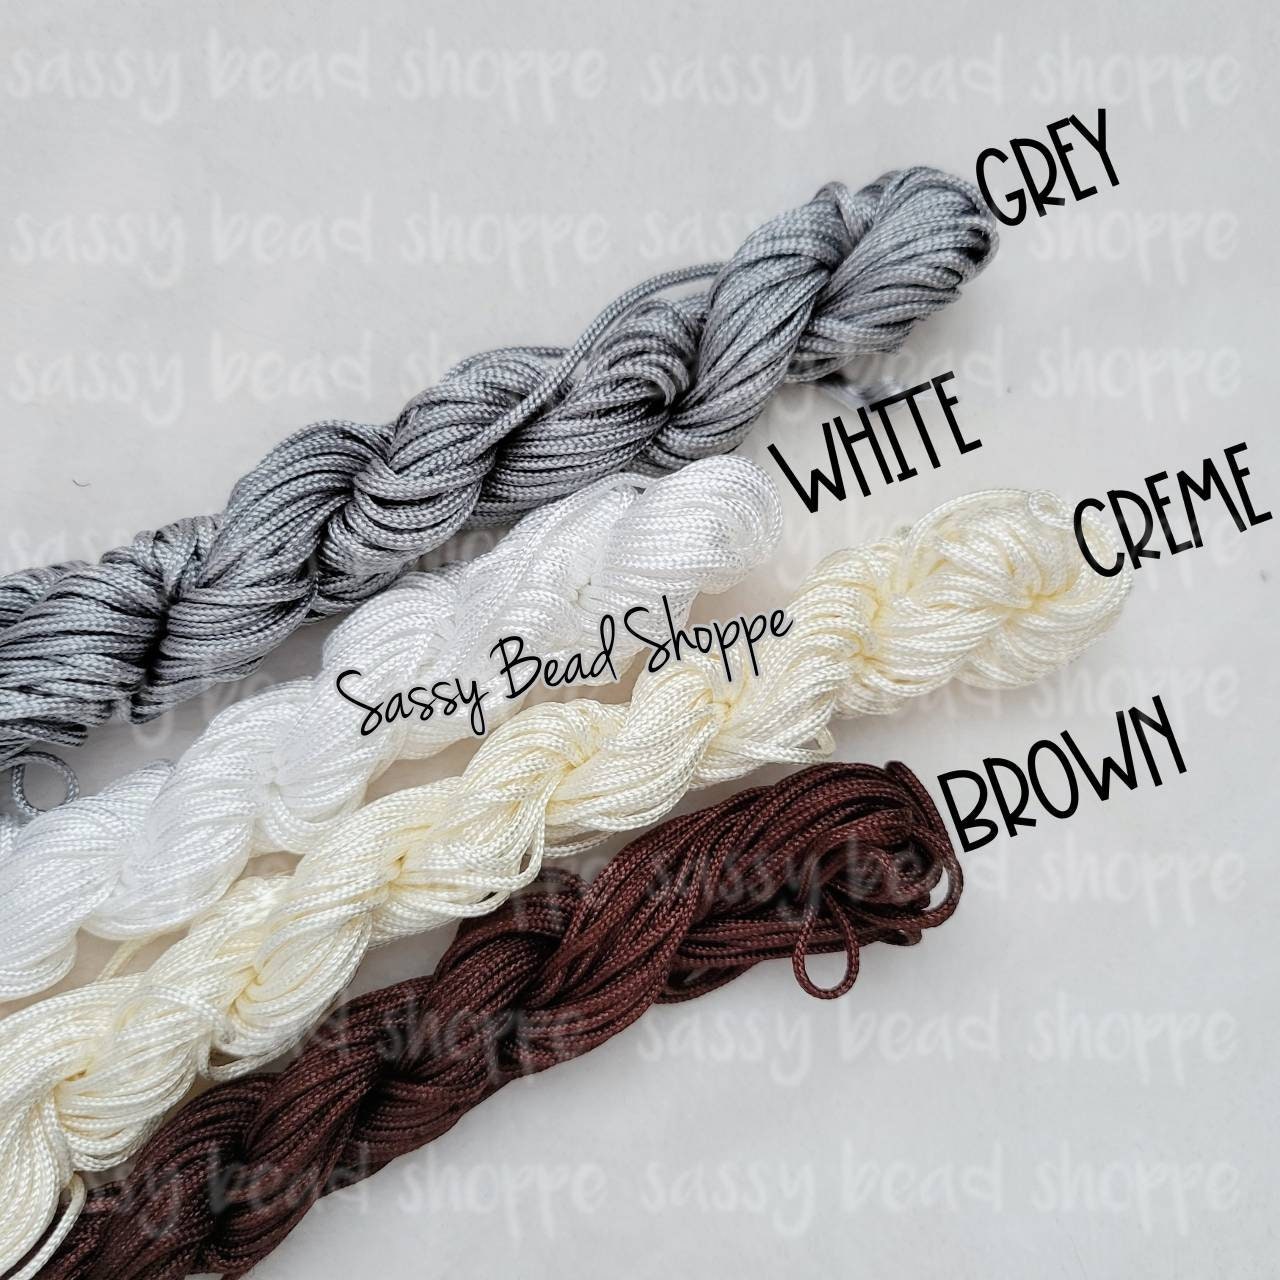 13 Yards of Nylon Cord, 2mm Multiple Neutral Color Options